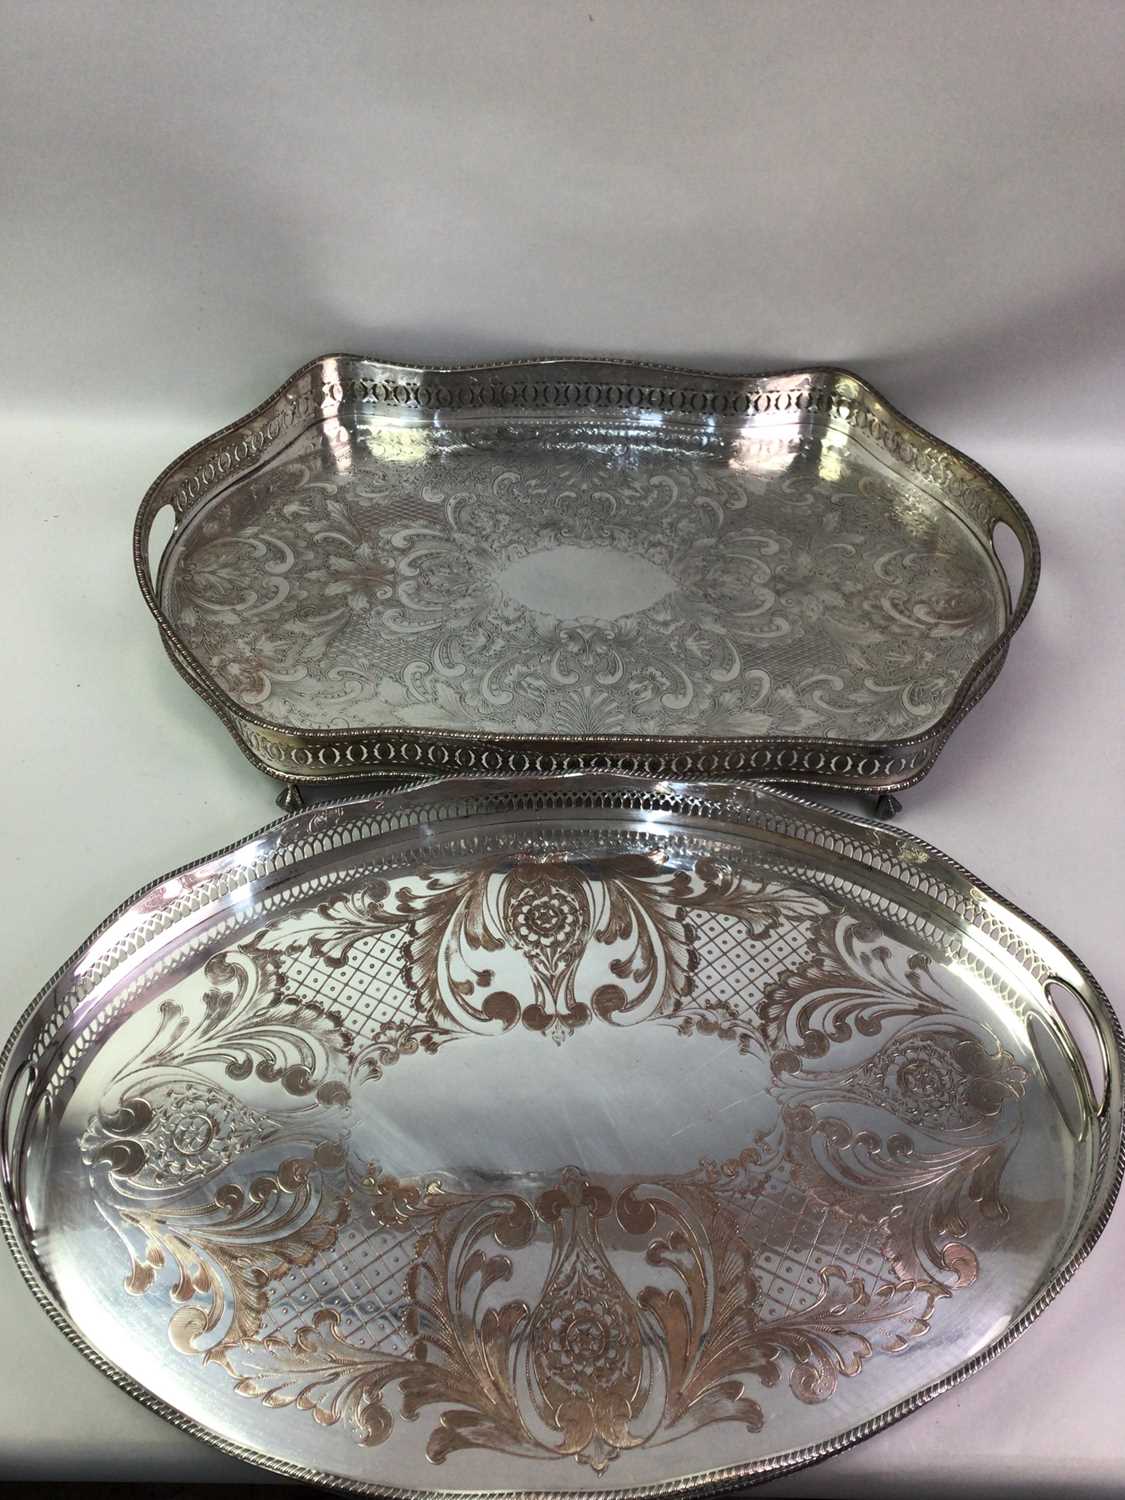 THREE SILVER PLATED GALLERY TRAYS, ALONG WITH A SILVER PLATED COMPORT AND OTHER ITEMS - Image 2 of 3